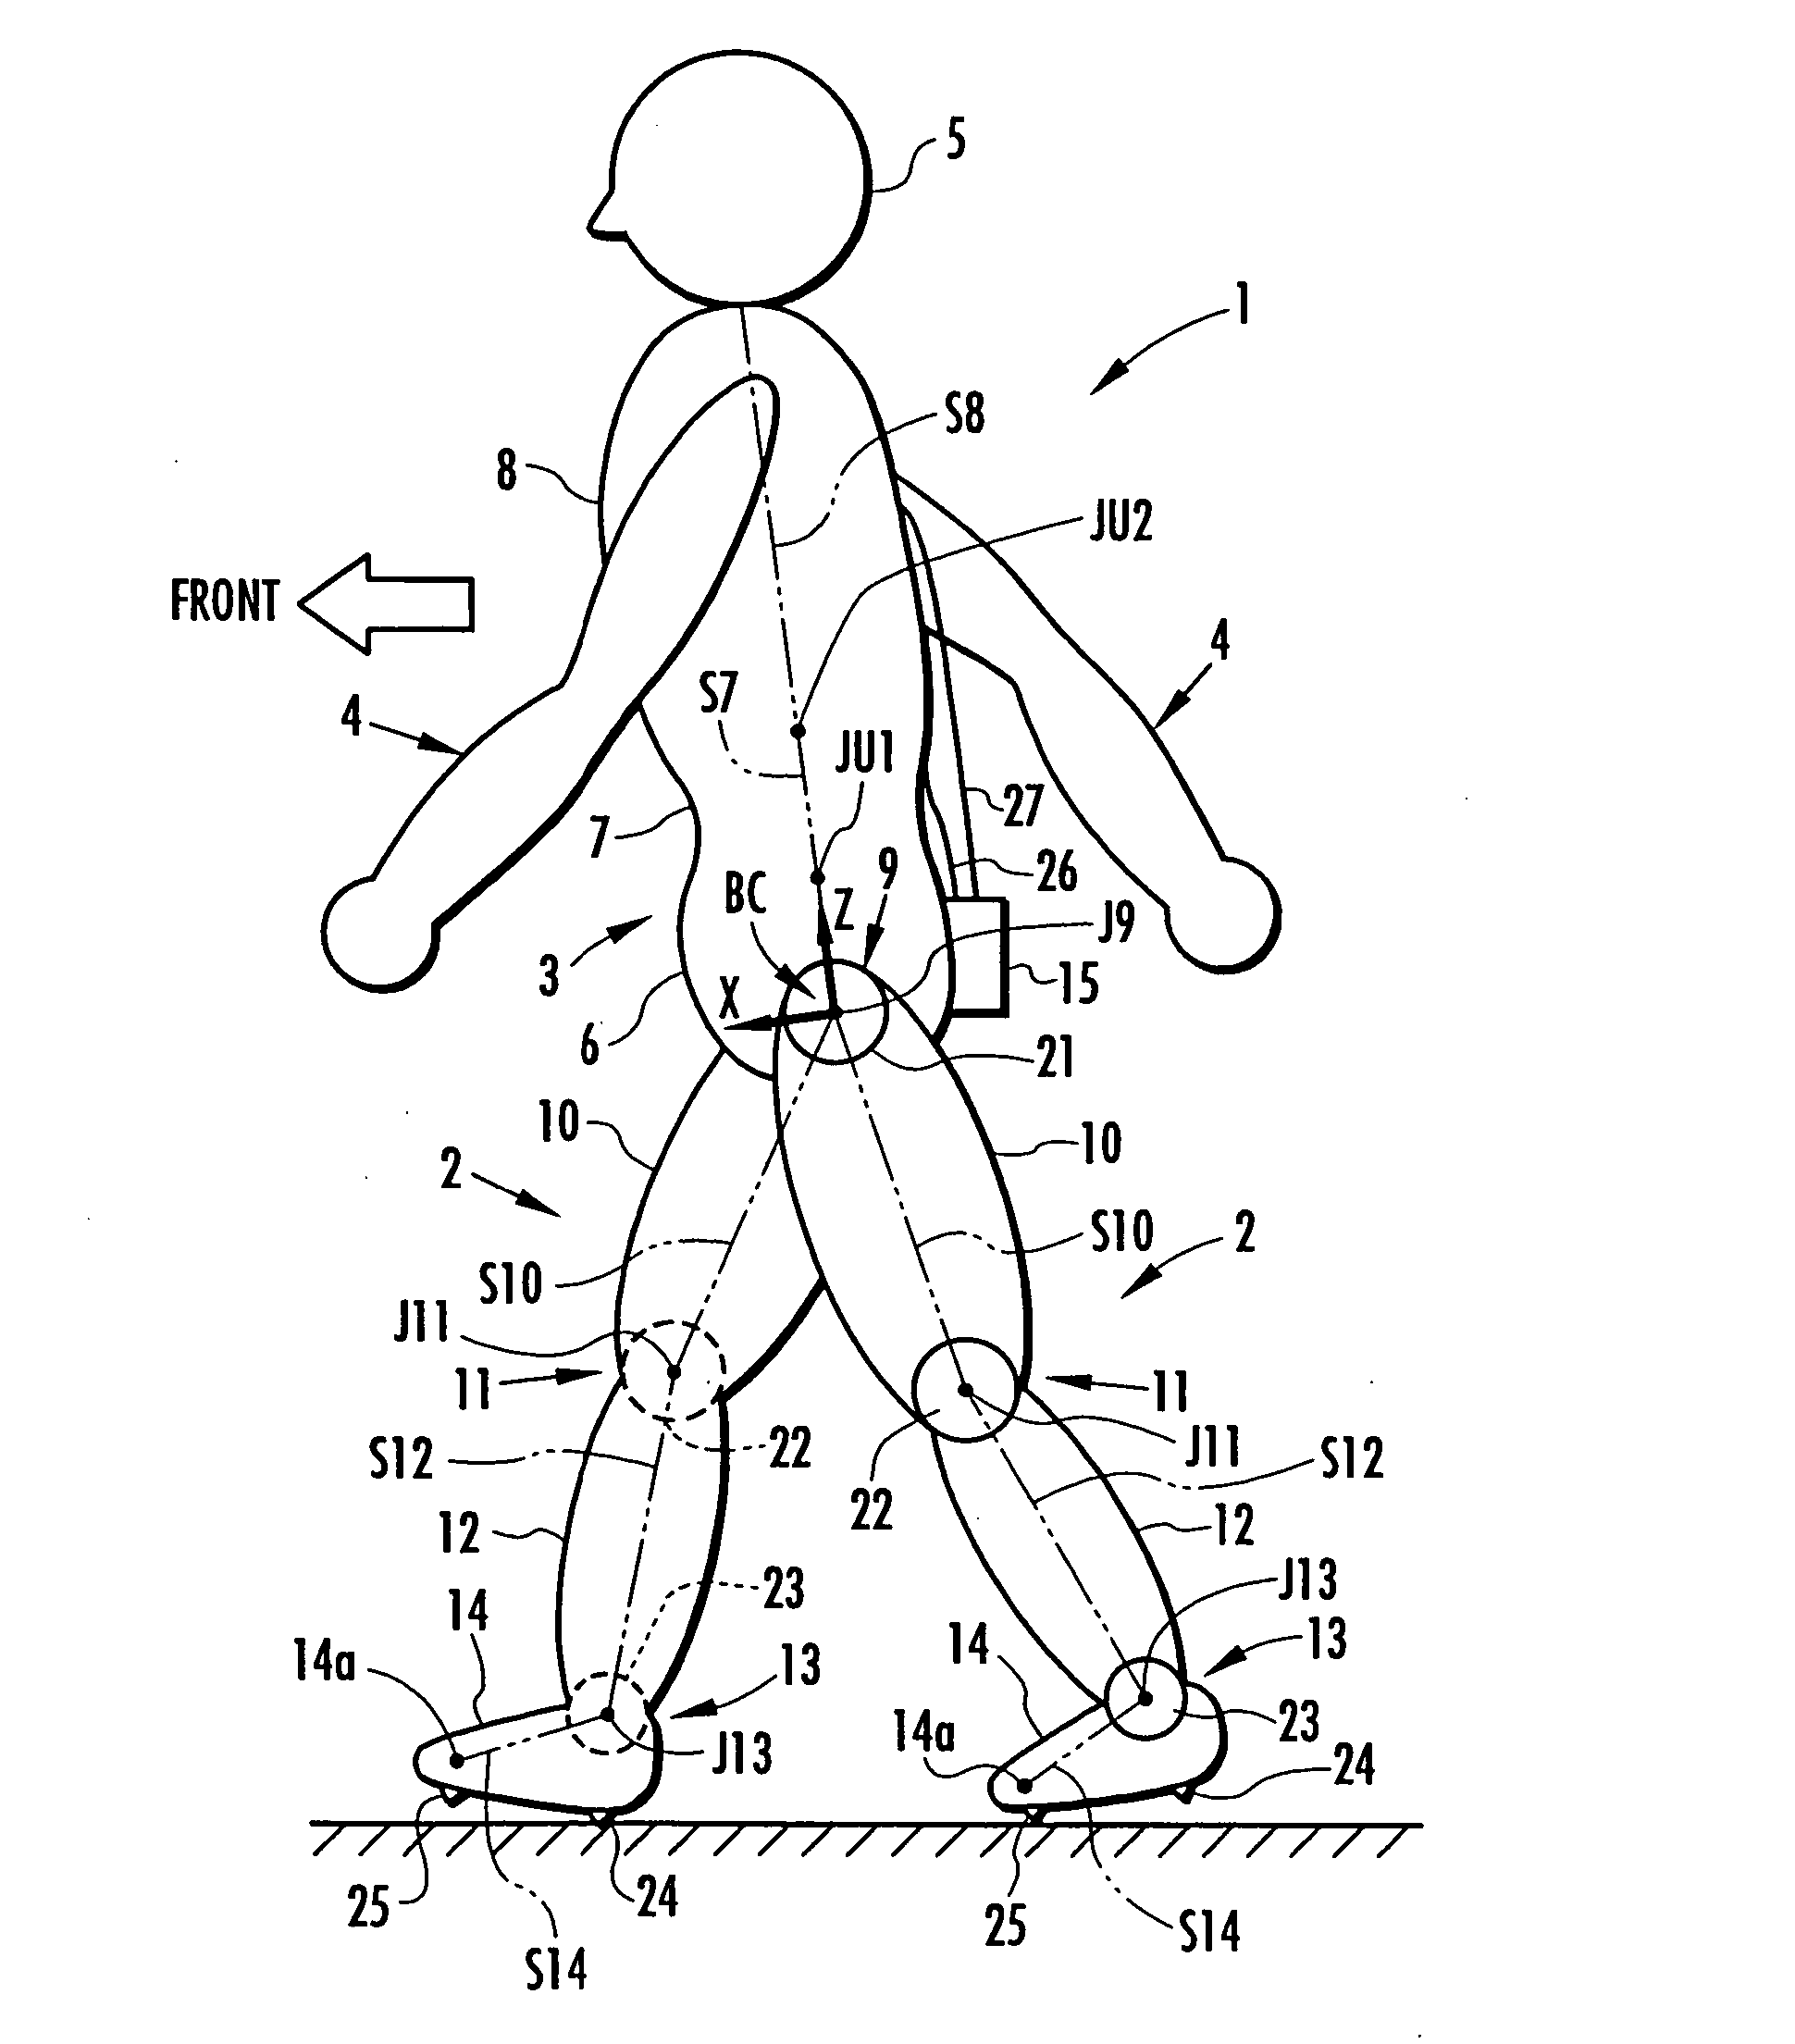 Method of estimating joint moment of bipedal walking body